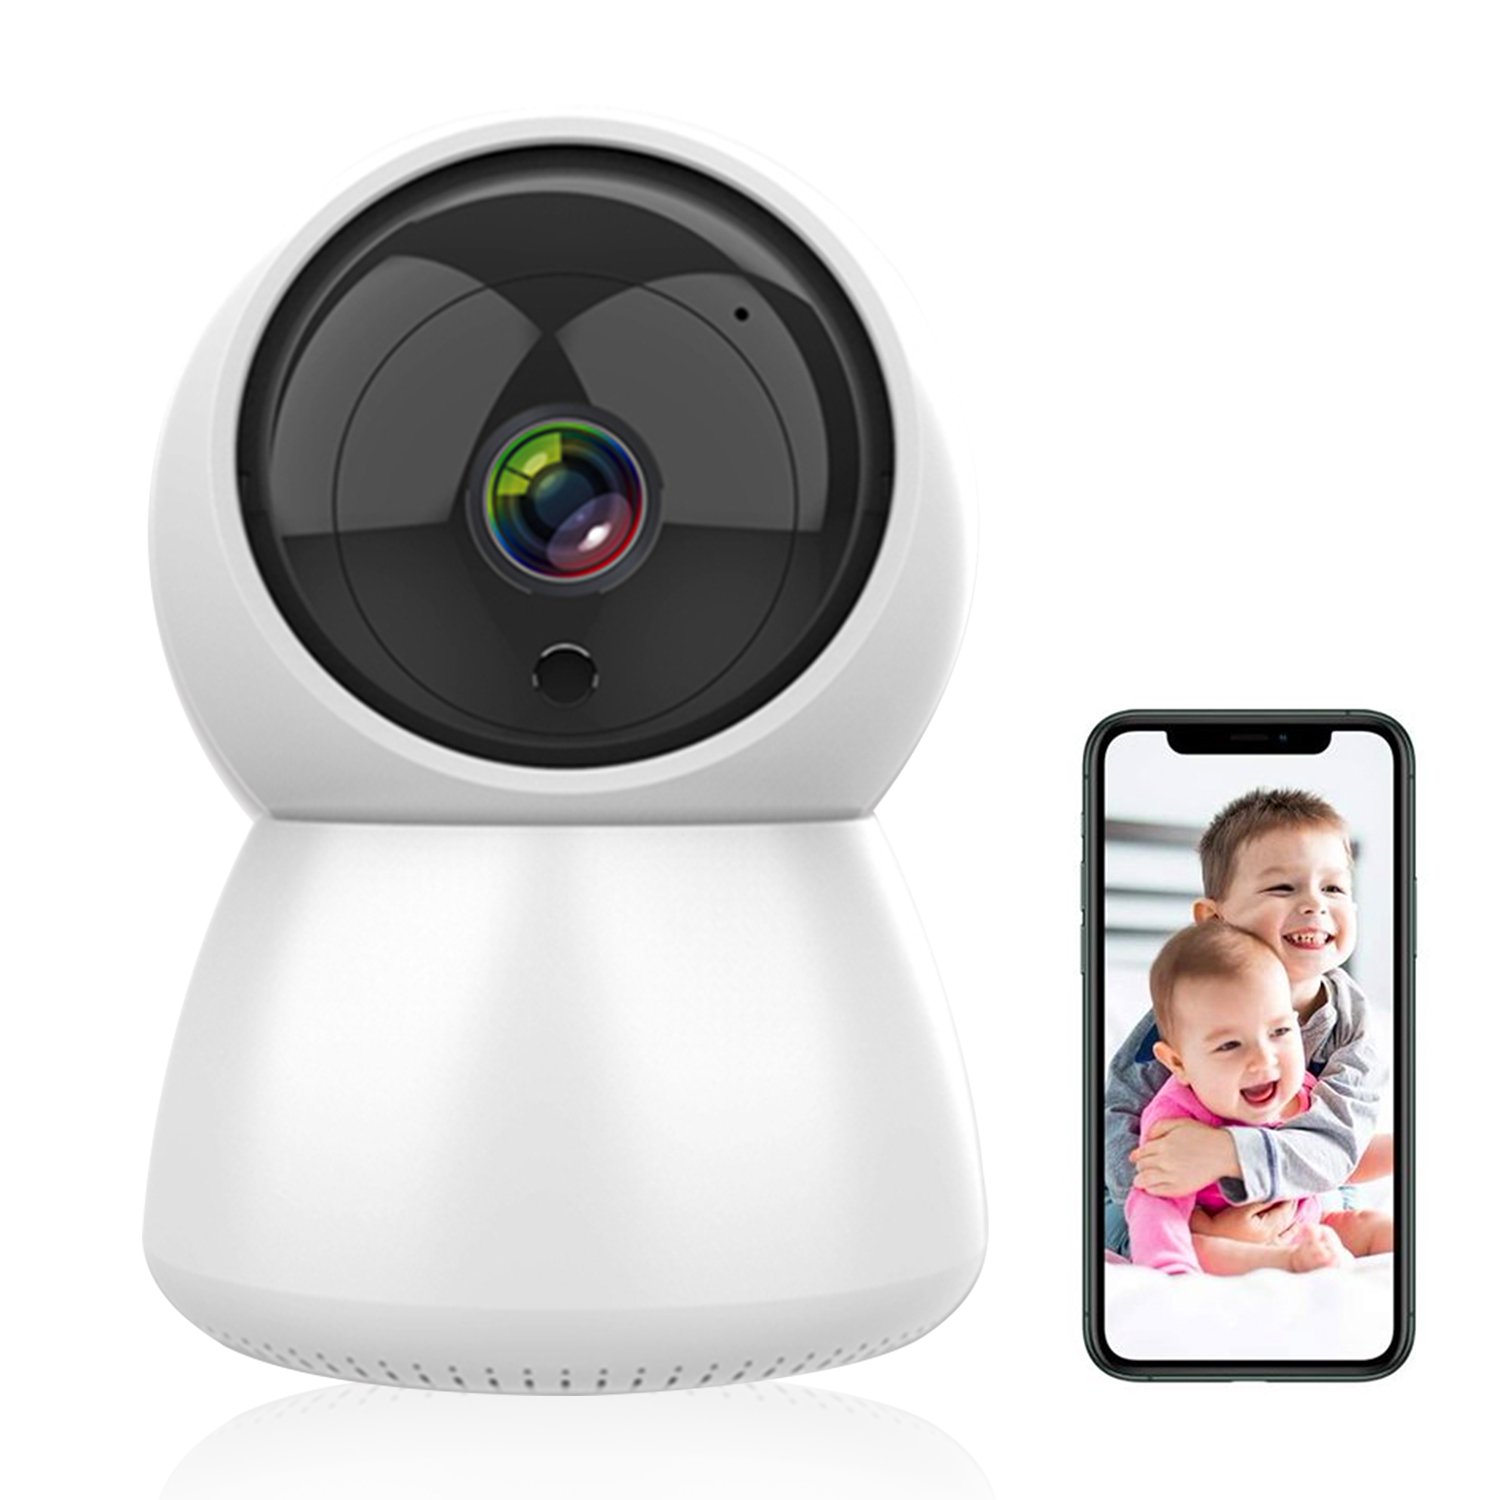 Cloud 1080P PTZ IP Camera Auto Tracking 2MP Home Security System CCTV Camera Network WiFi IP Camera Wireless Webcam Baby Monitor